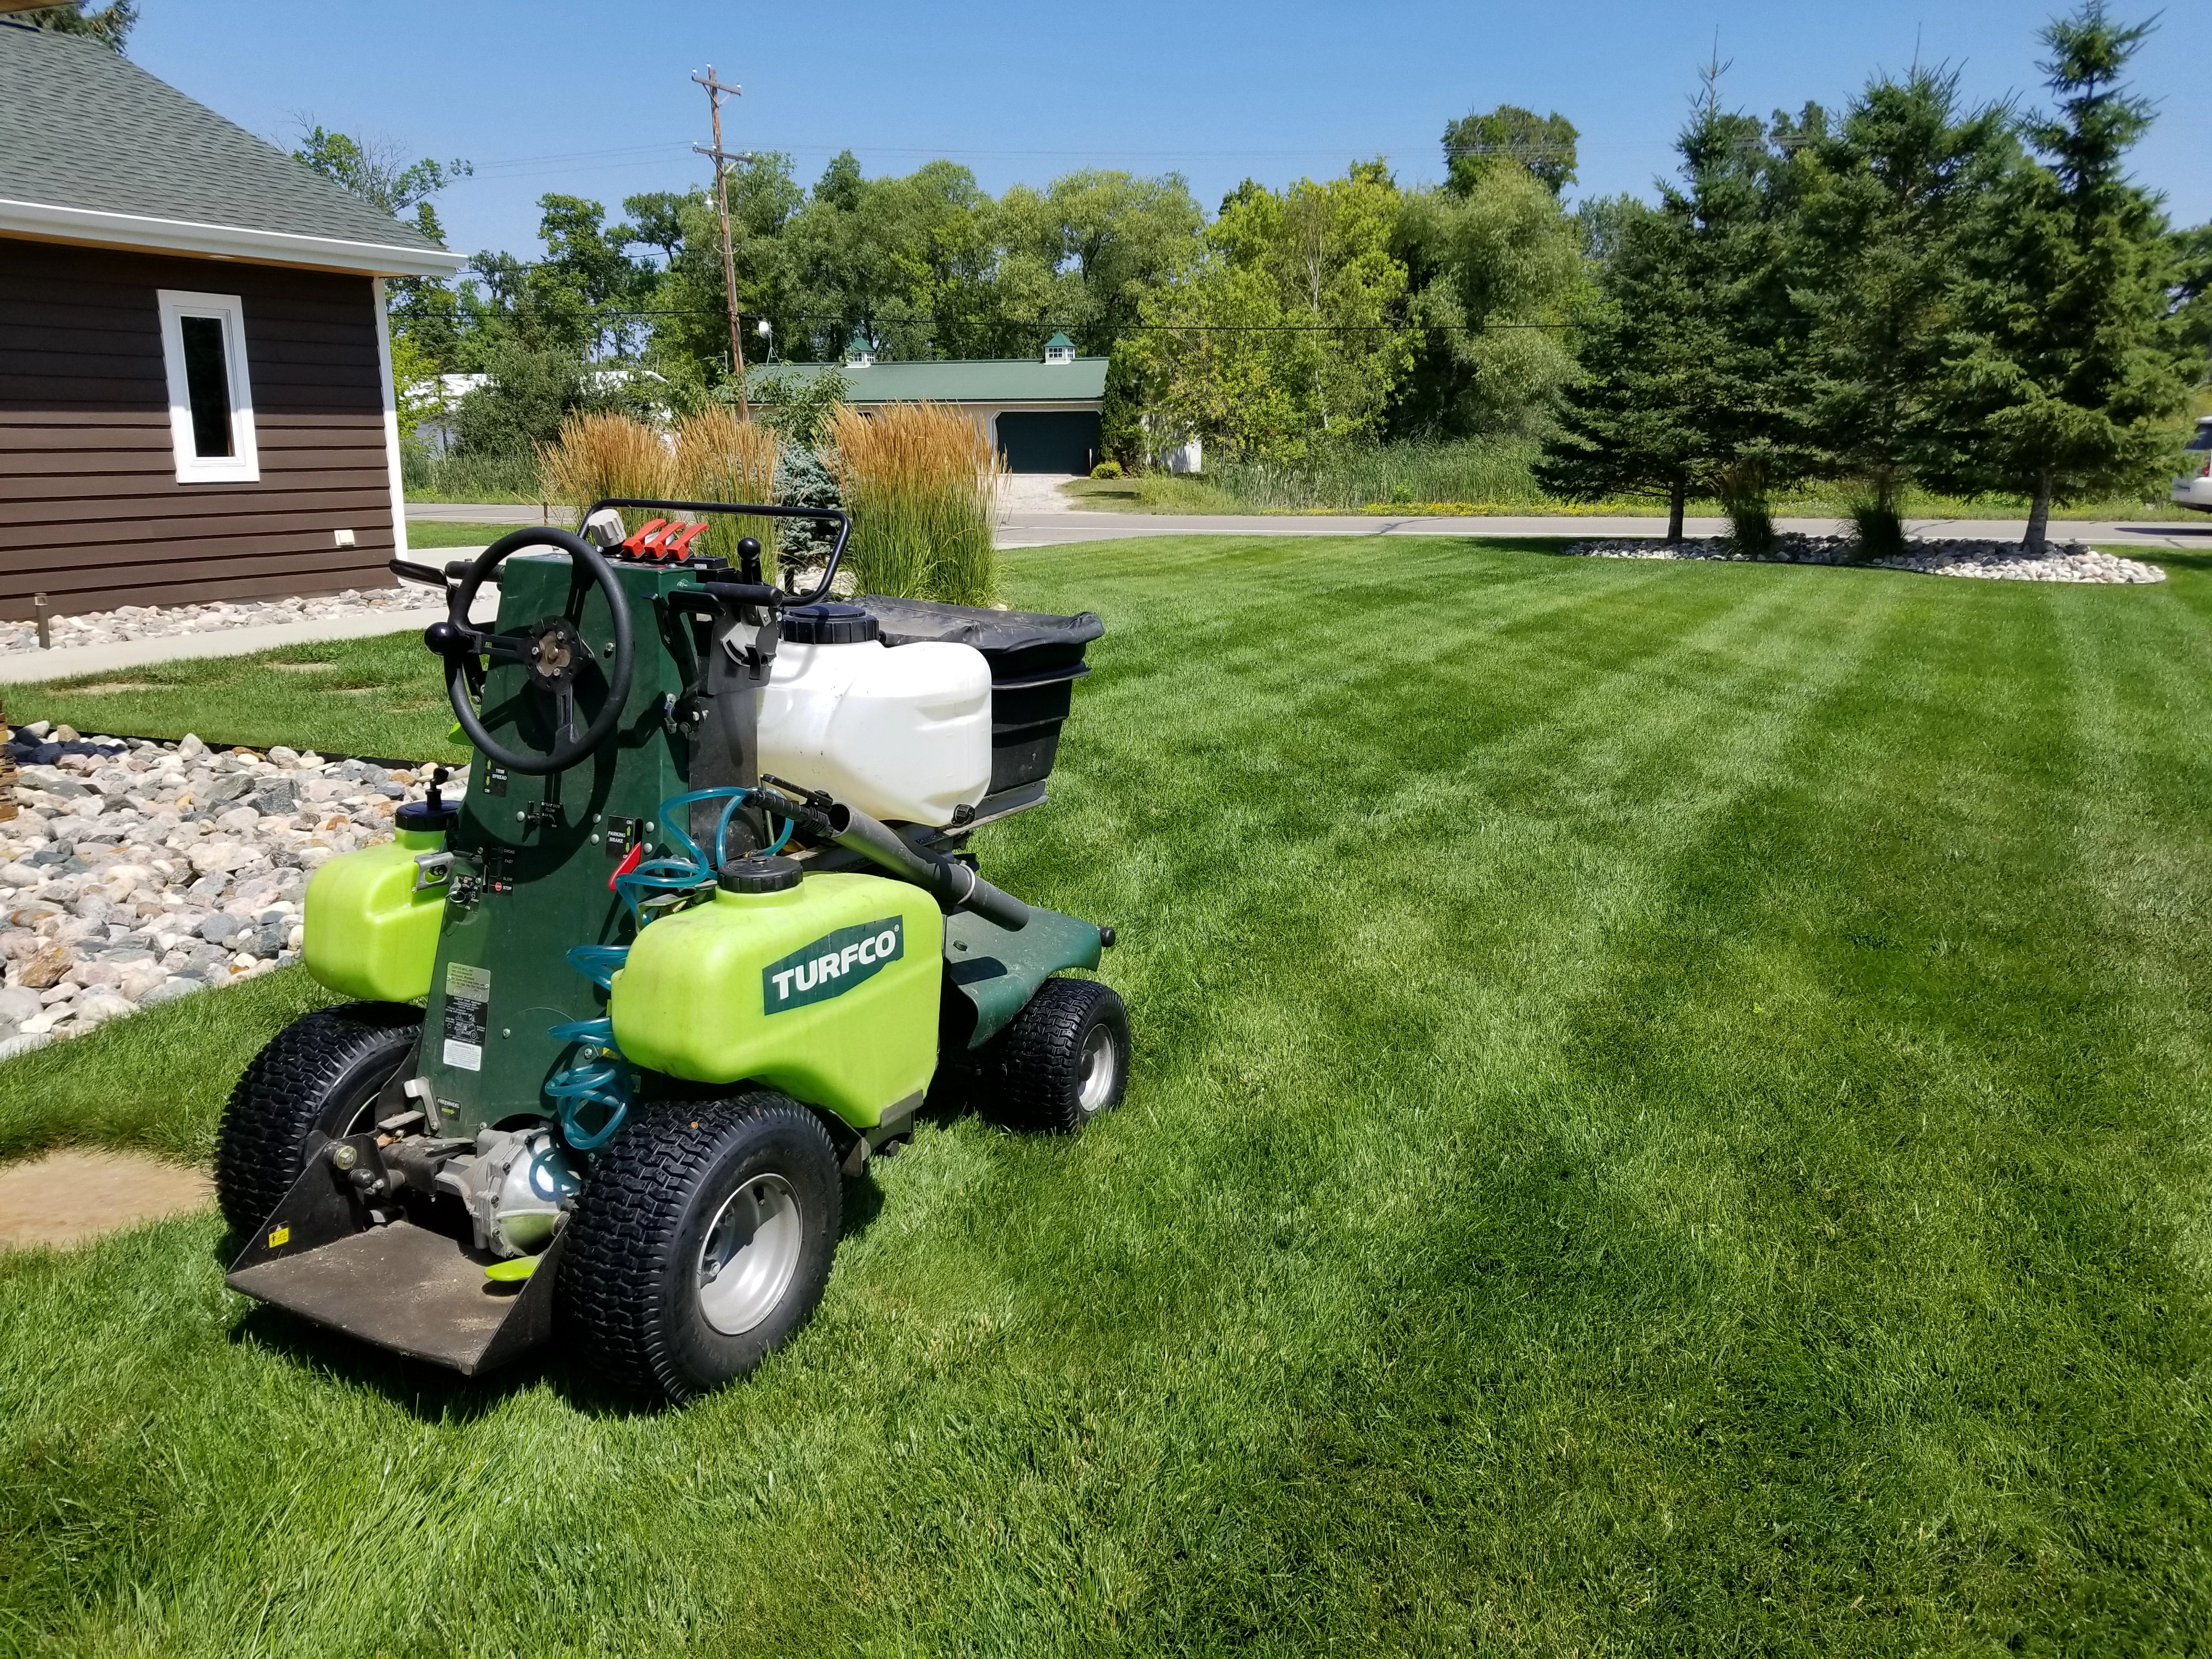 Miller Yard Care & Construction team member applying a fertilization treatment to a lawn in Detroit Lakes, MN.